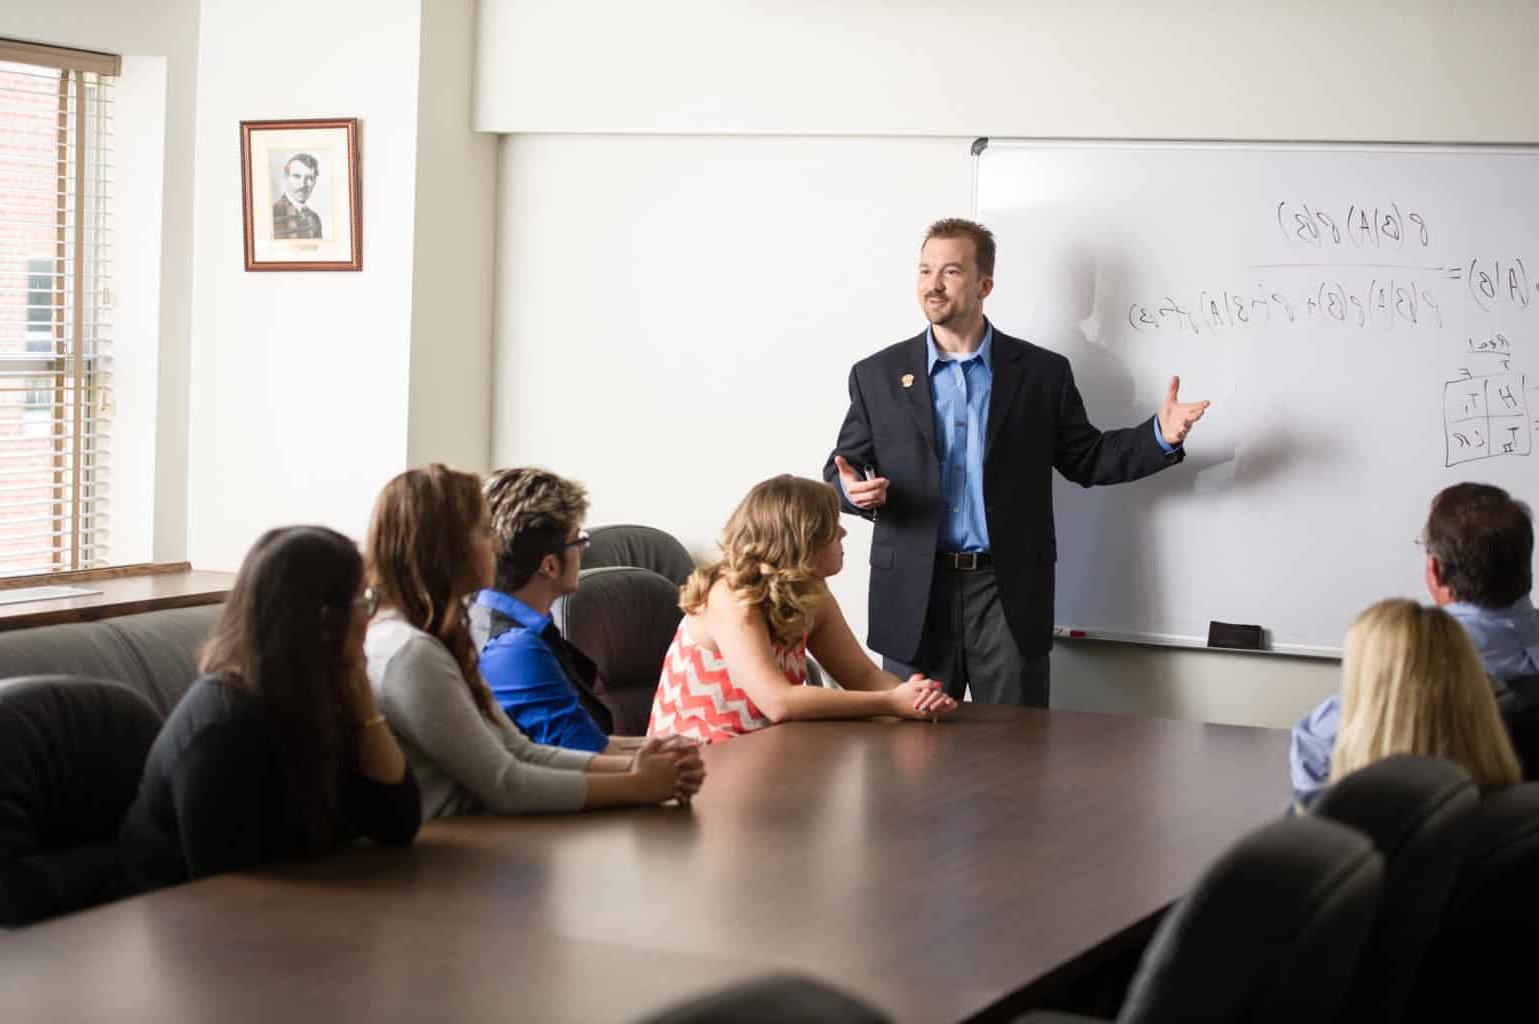 Psychology instructor teaching class around a large boardroom table.